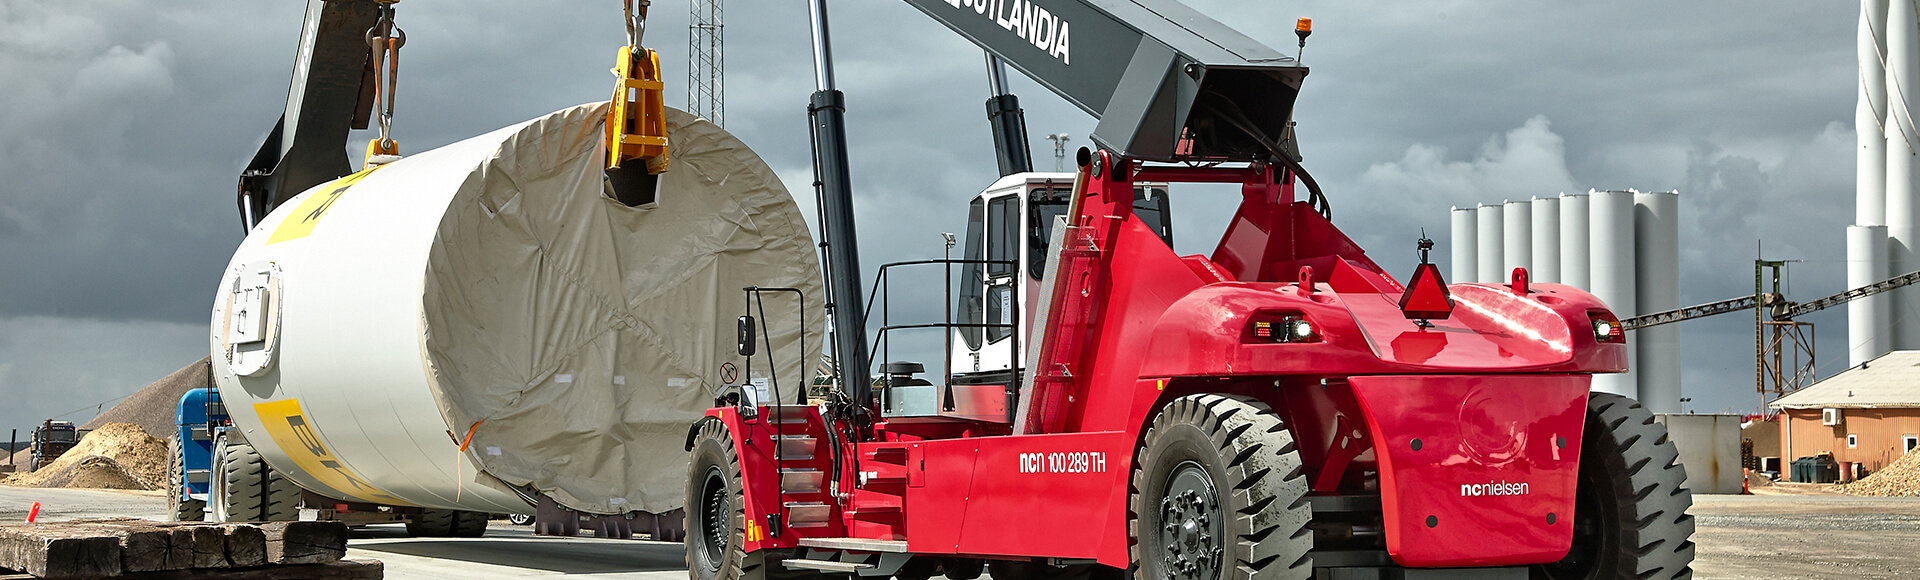 UNIQUE PARTNERSHIP WITH KONECRANES ABOUT A NEW 100 TONS REACH STACKER